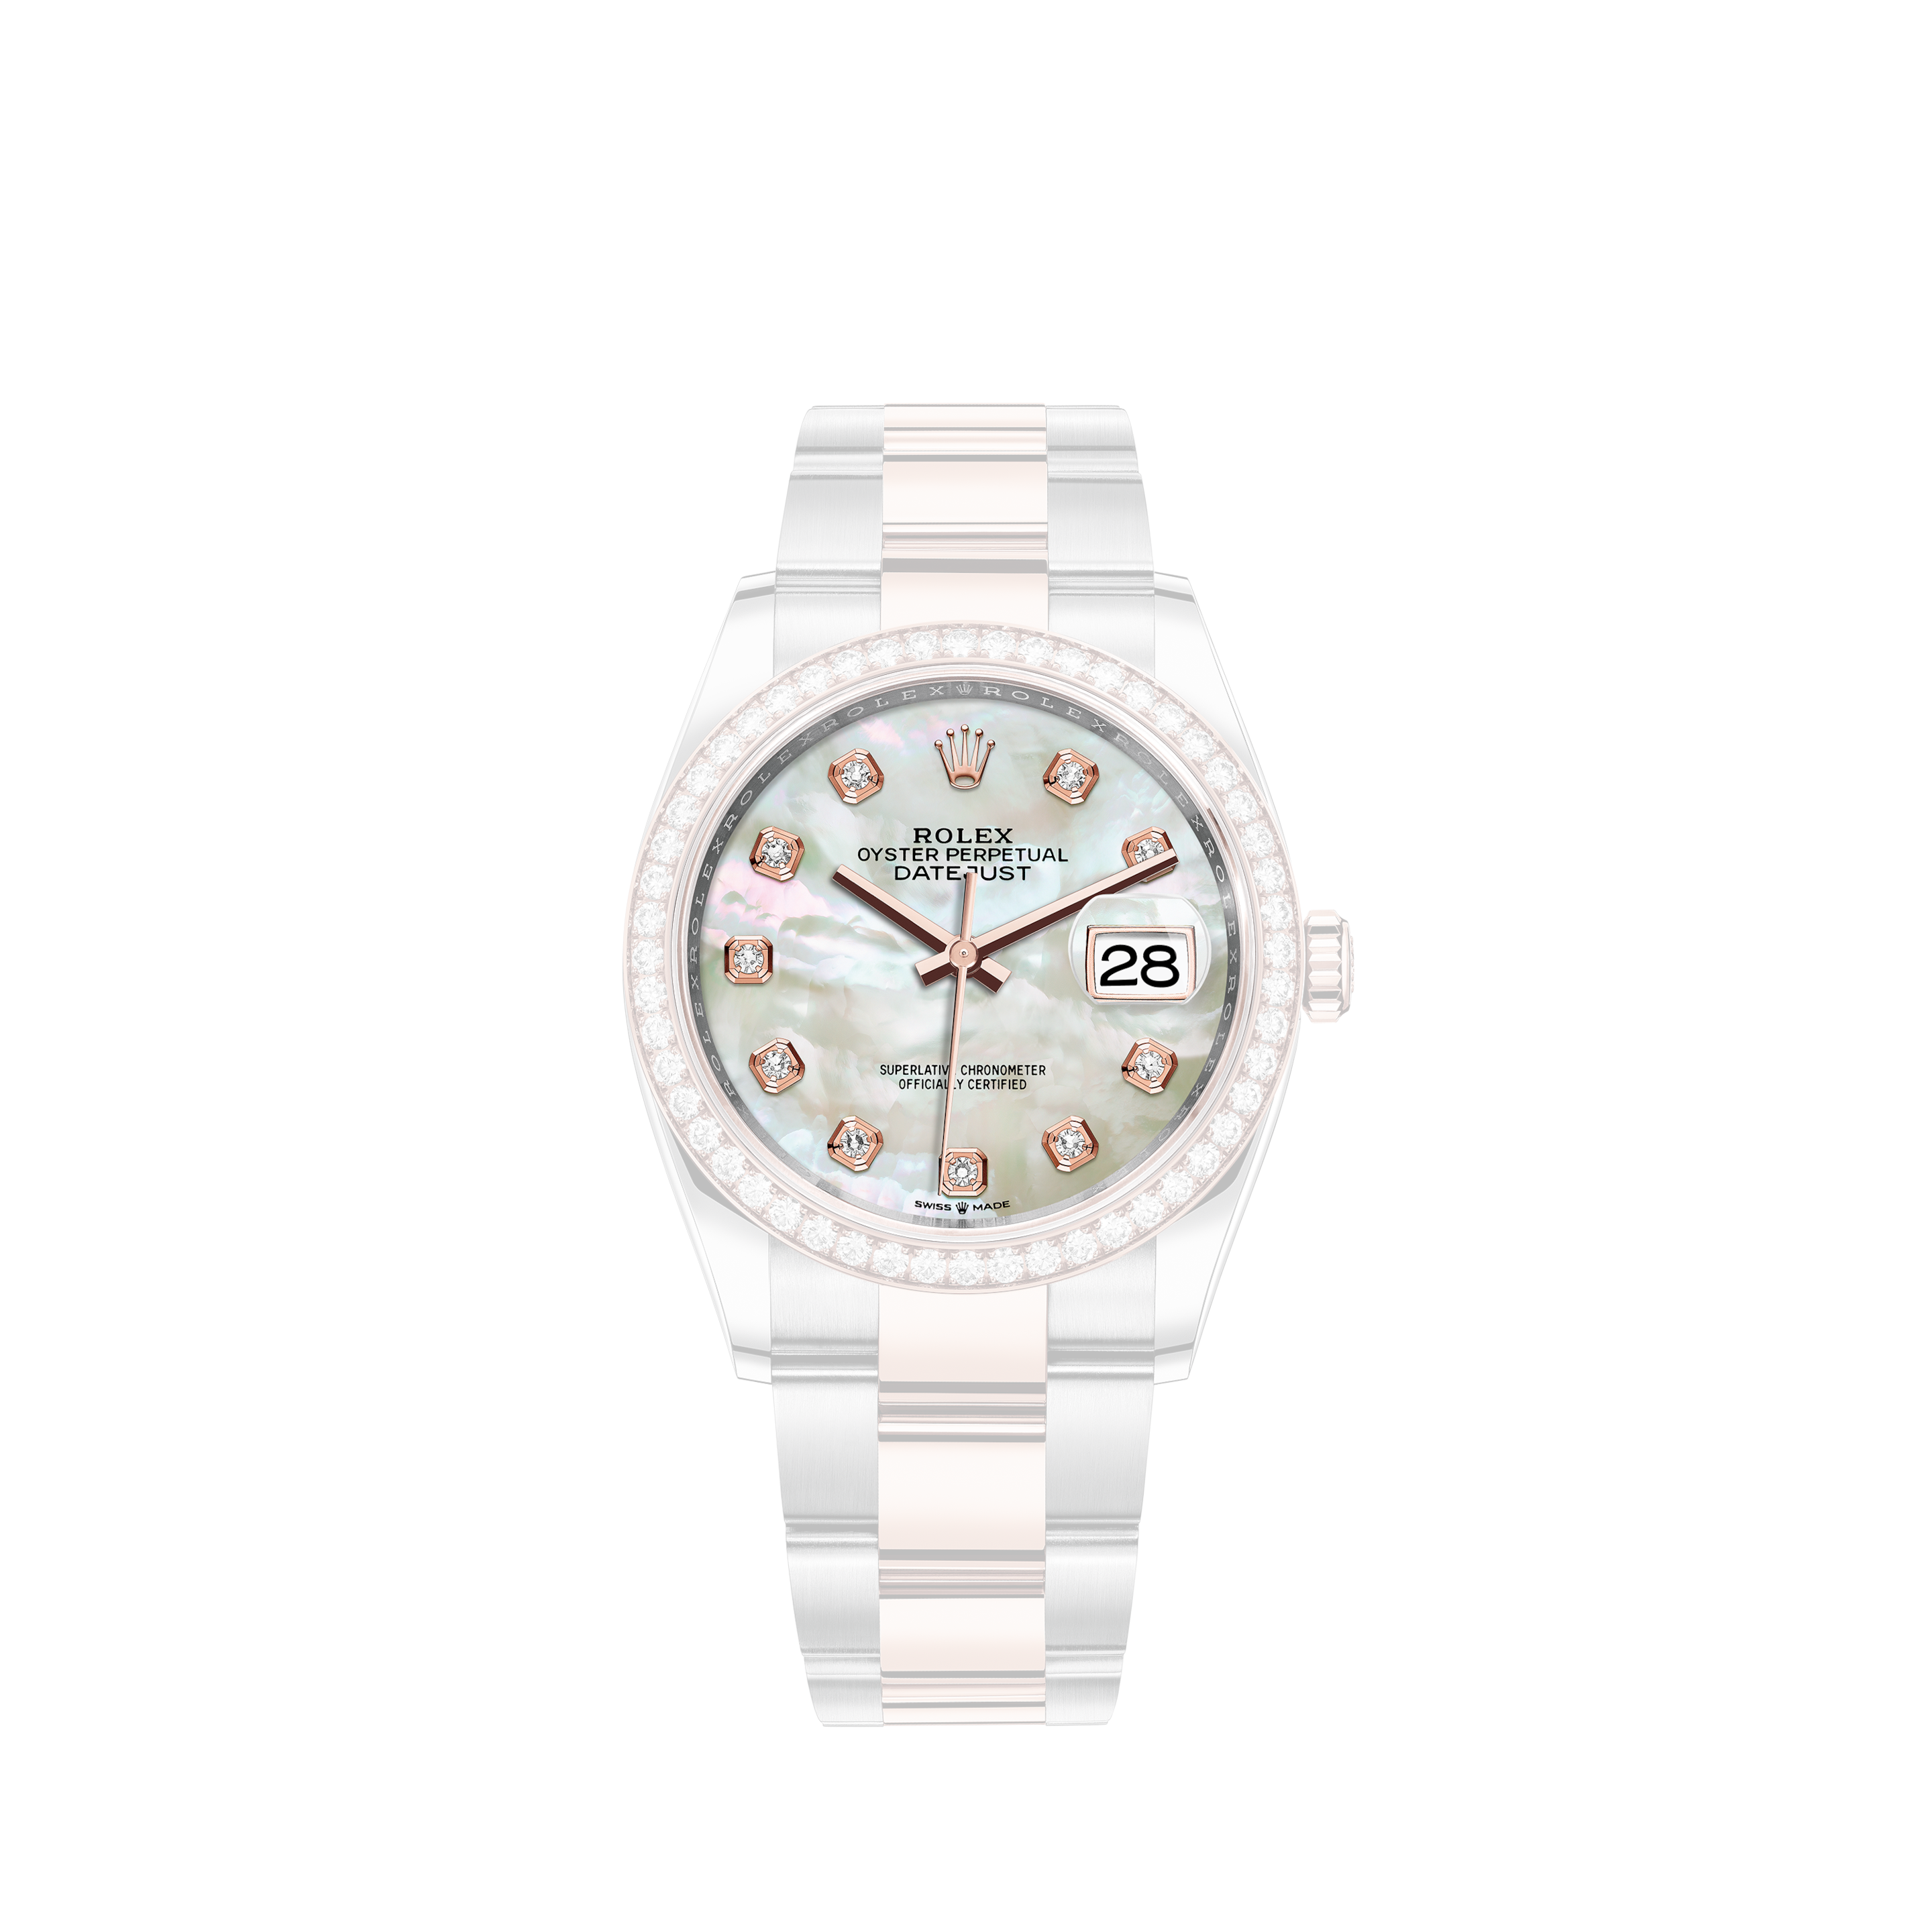 Rolex [204] W No. 1994-Circa 1995 Manufactured PRODUCT ROLEX Rolex Datejust Pearlmaster 69299G Silver Computer 10P Diamond Dial WG Solid White Gold Automatic Date Display Women's Watch